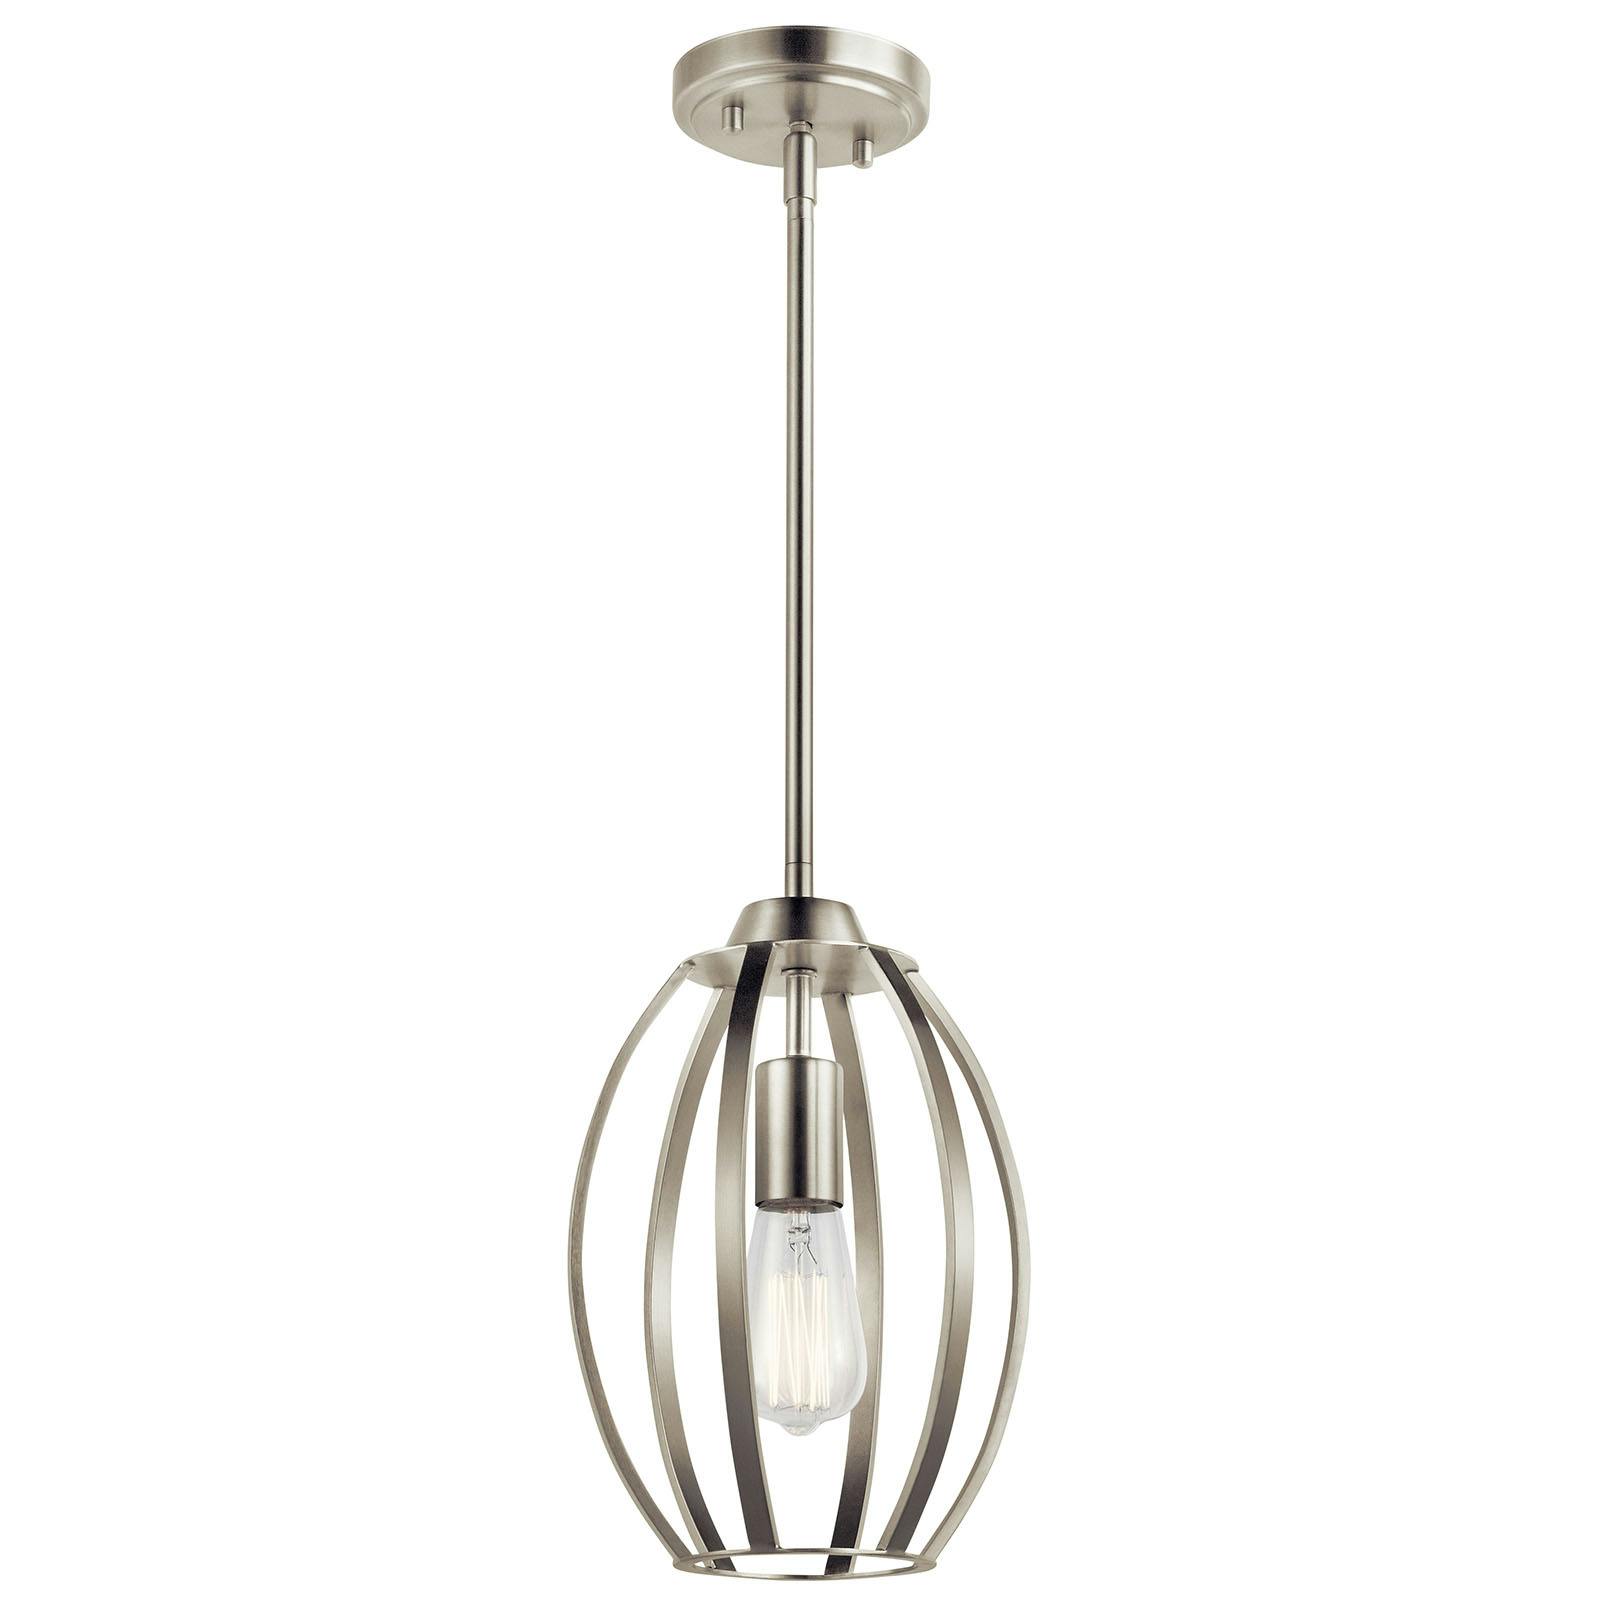 Tao 1 Light Pendant Brushed Nickel on a white background